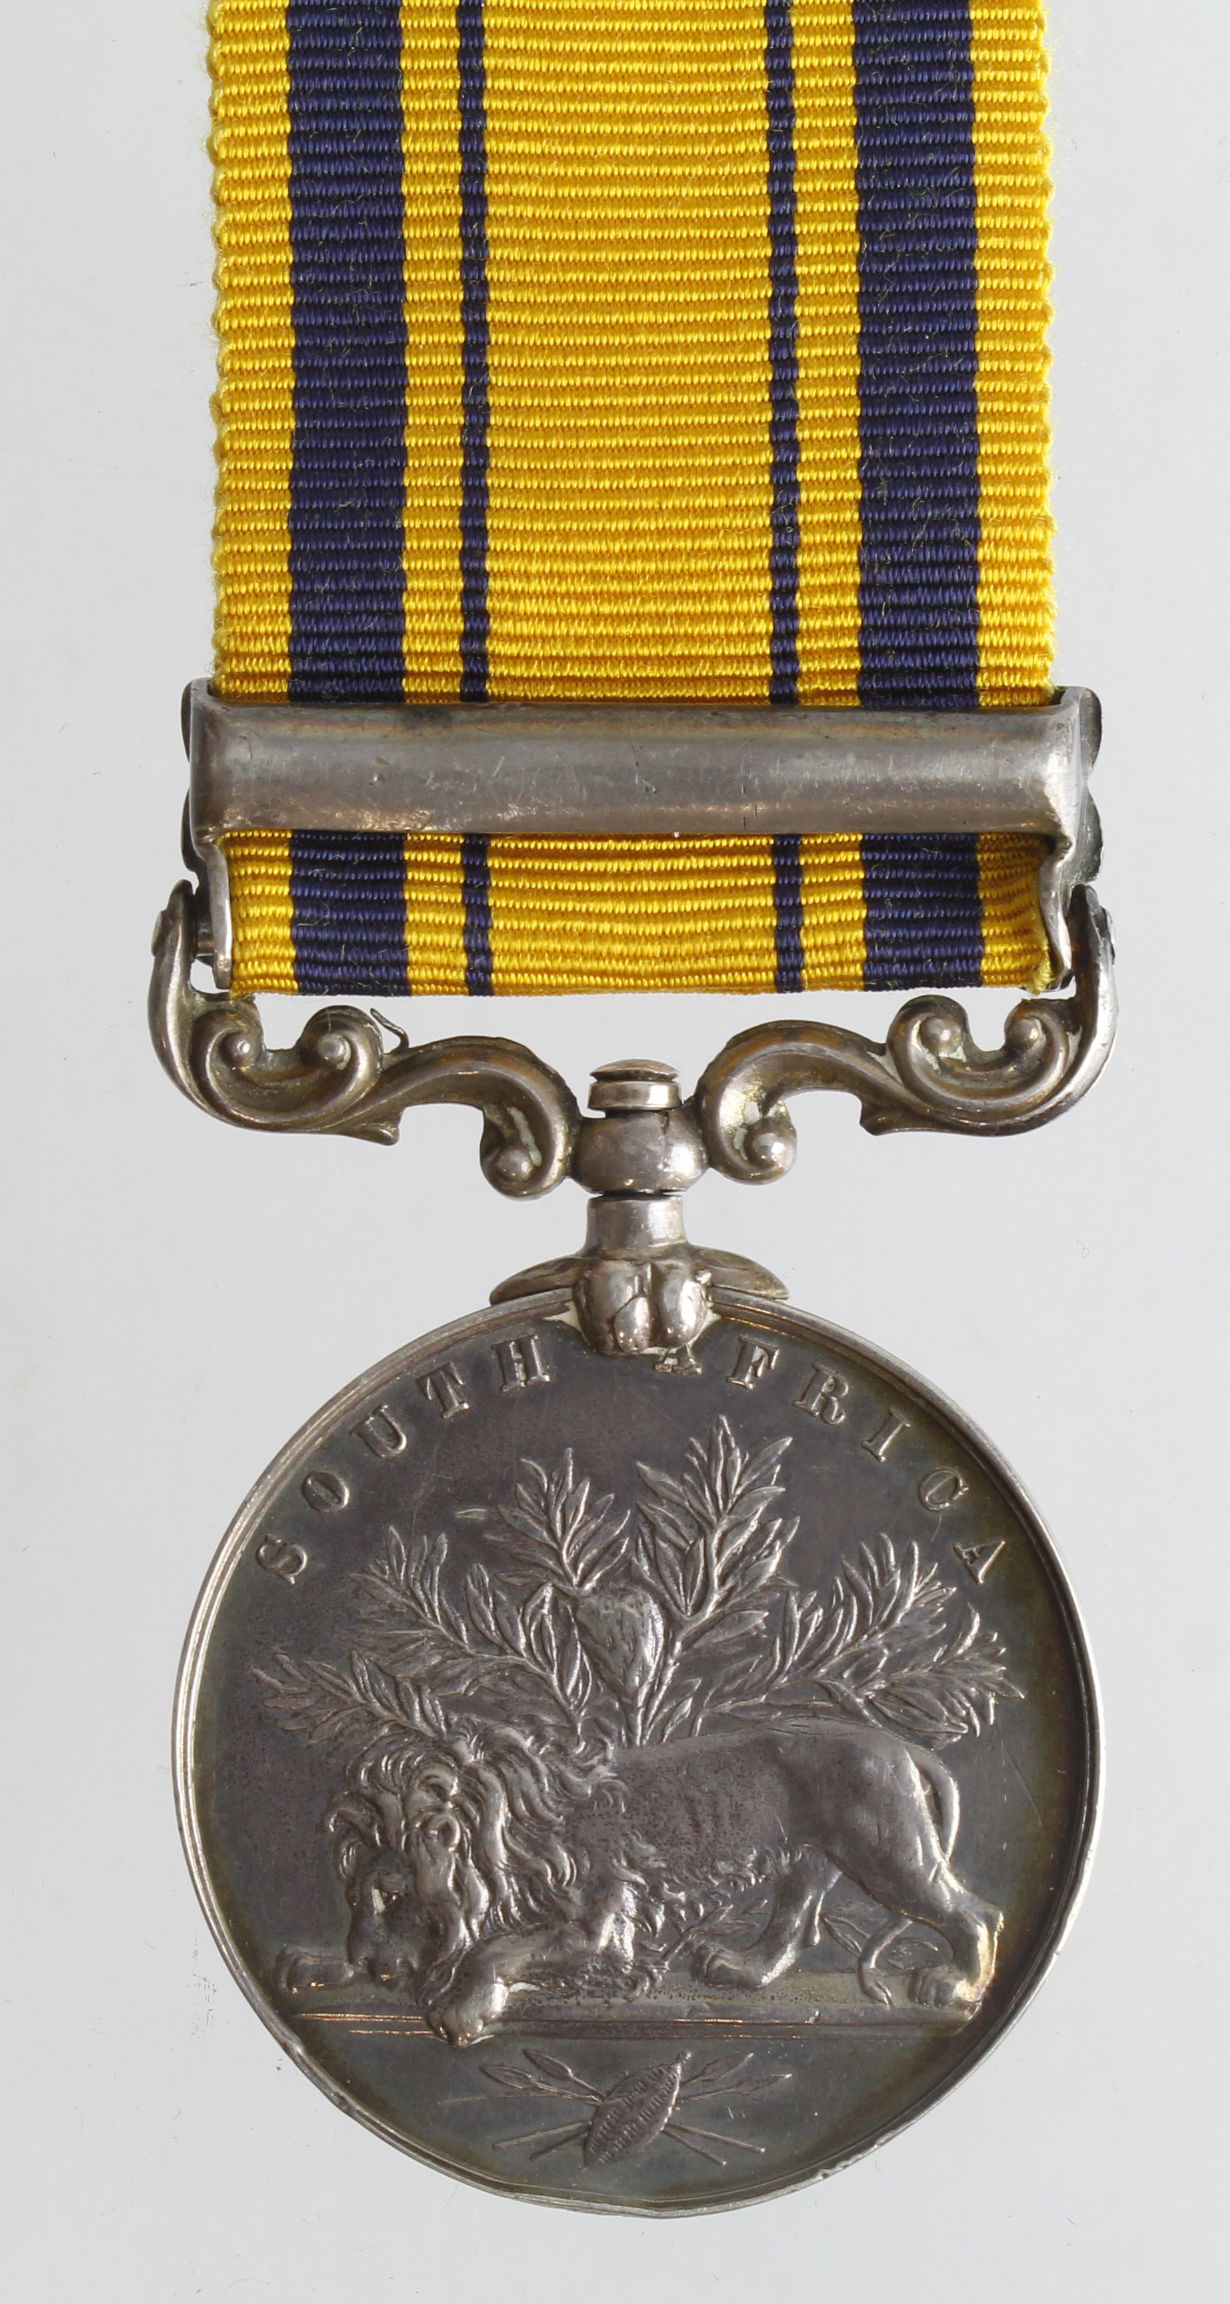 South Africa Medal with 1879 clasp (76 Pte F Ashby 57th Foot) renamed. Sold as seen - Image 2 of 2